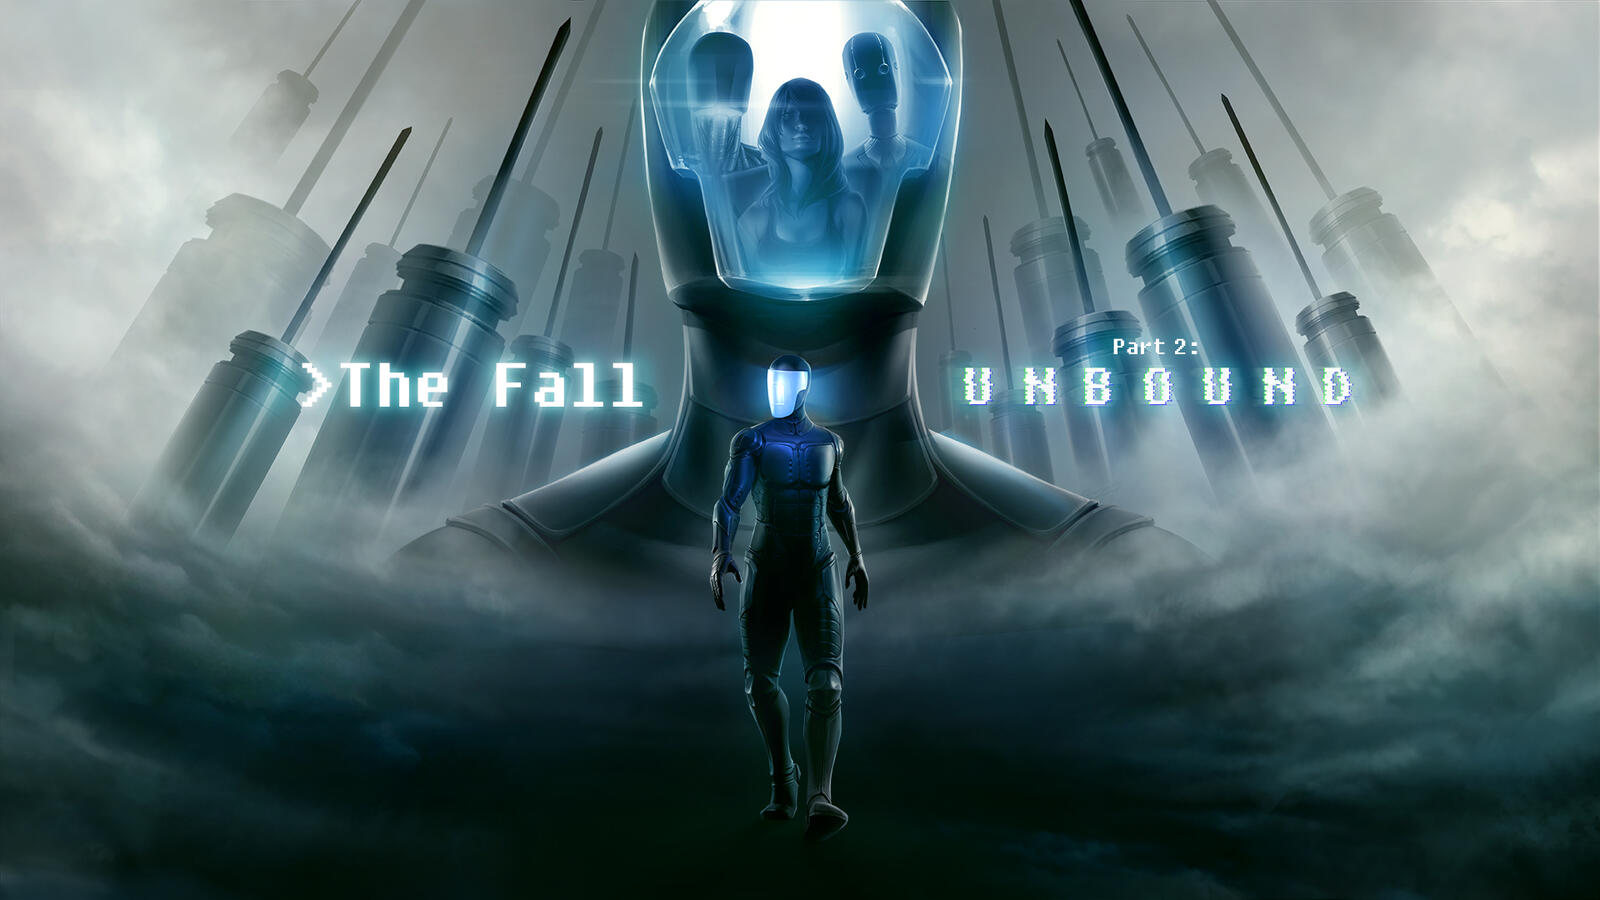 Wallpapers fall 2 pc games artist on the desktop